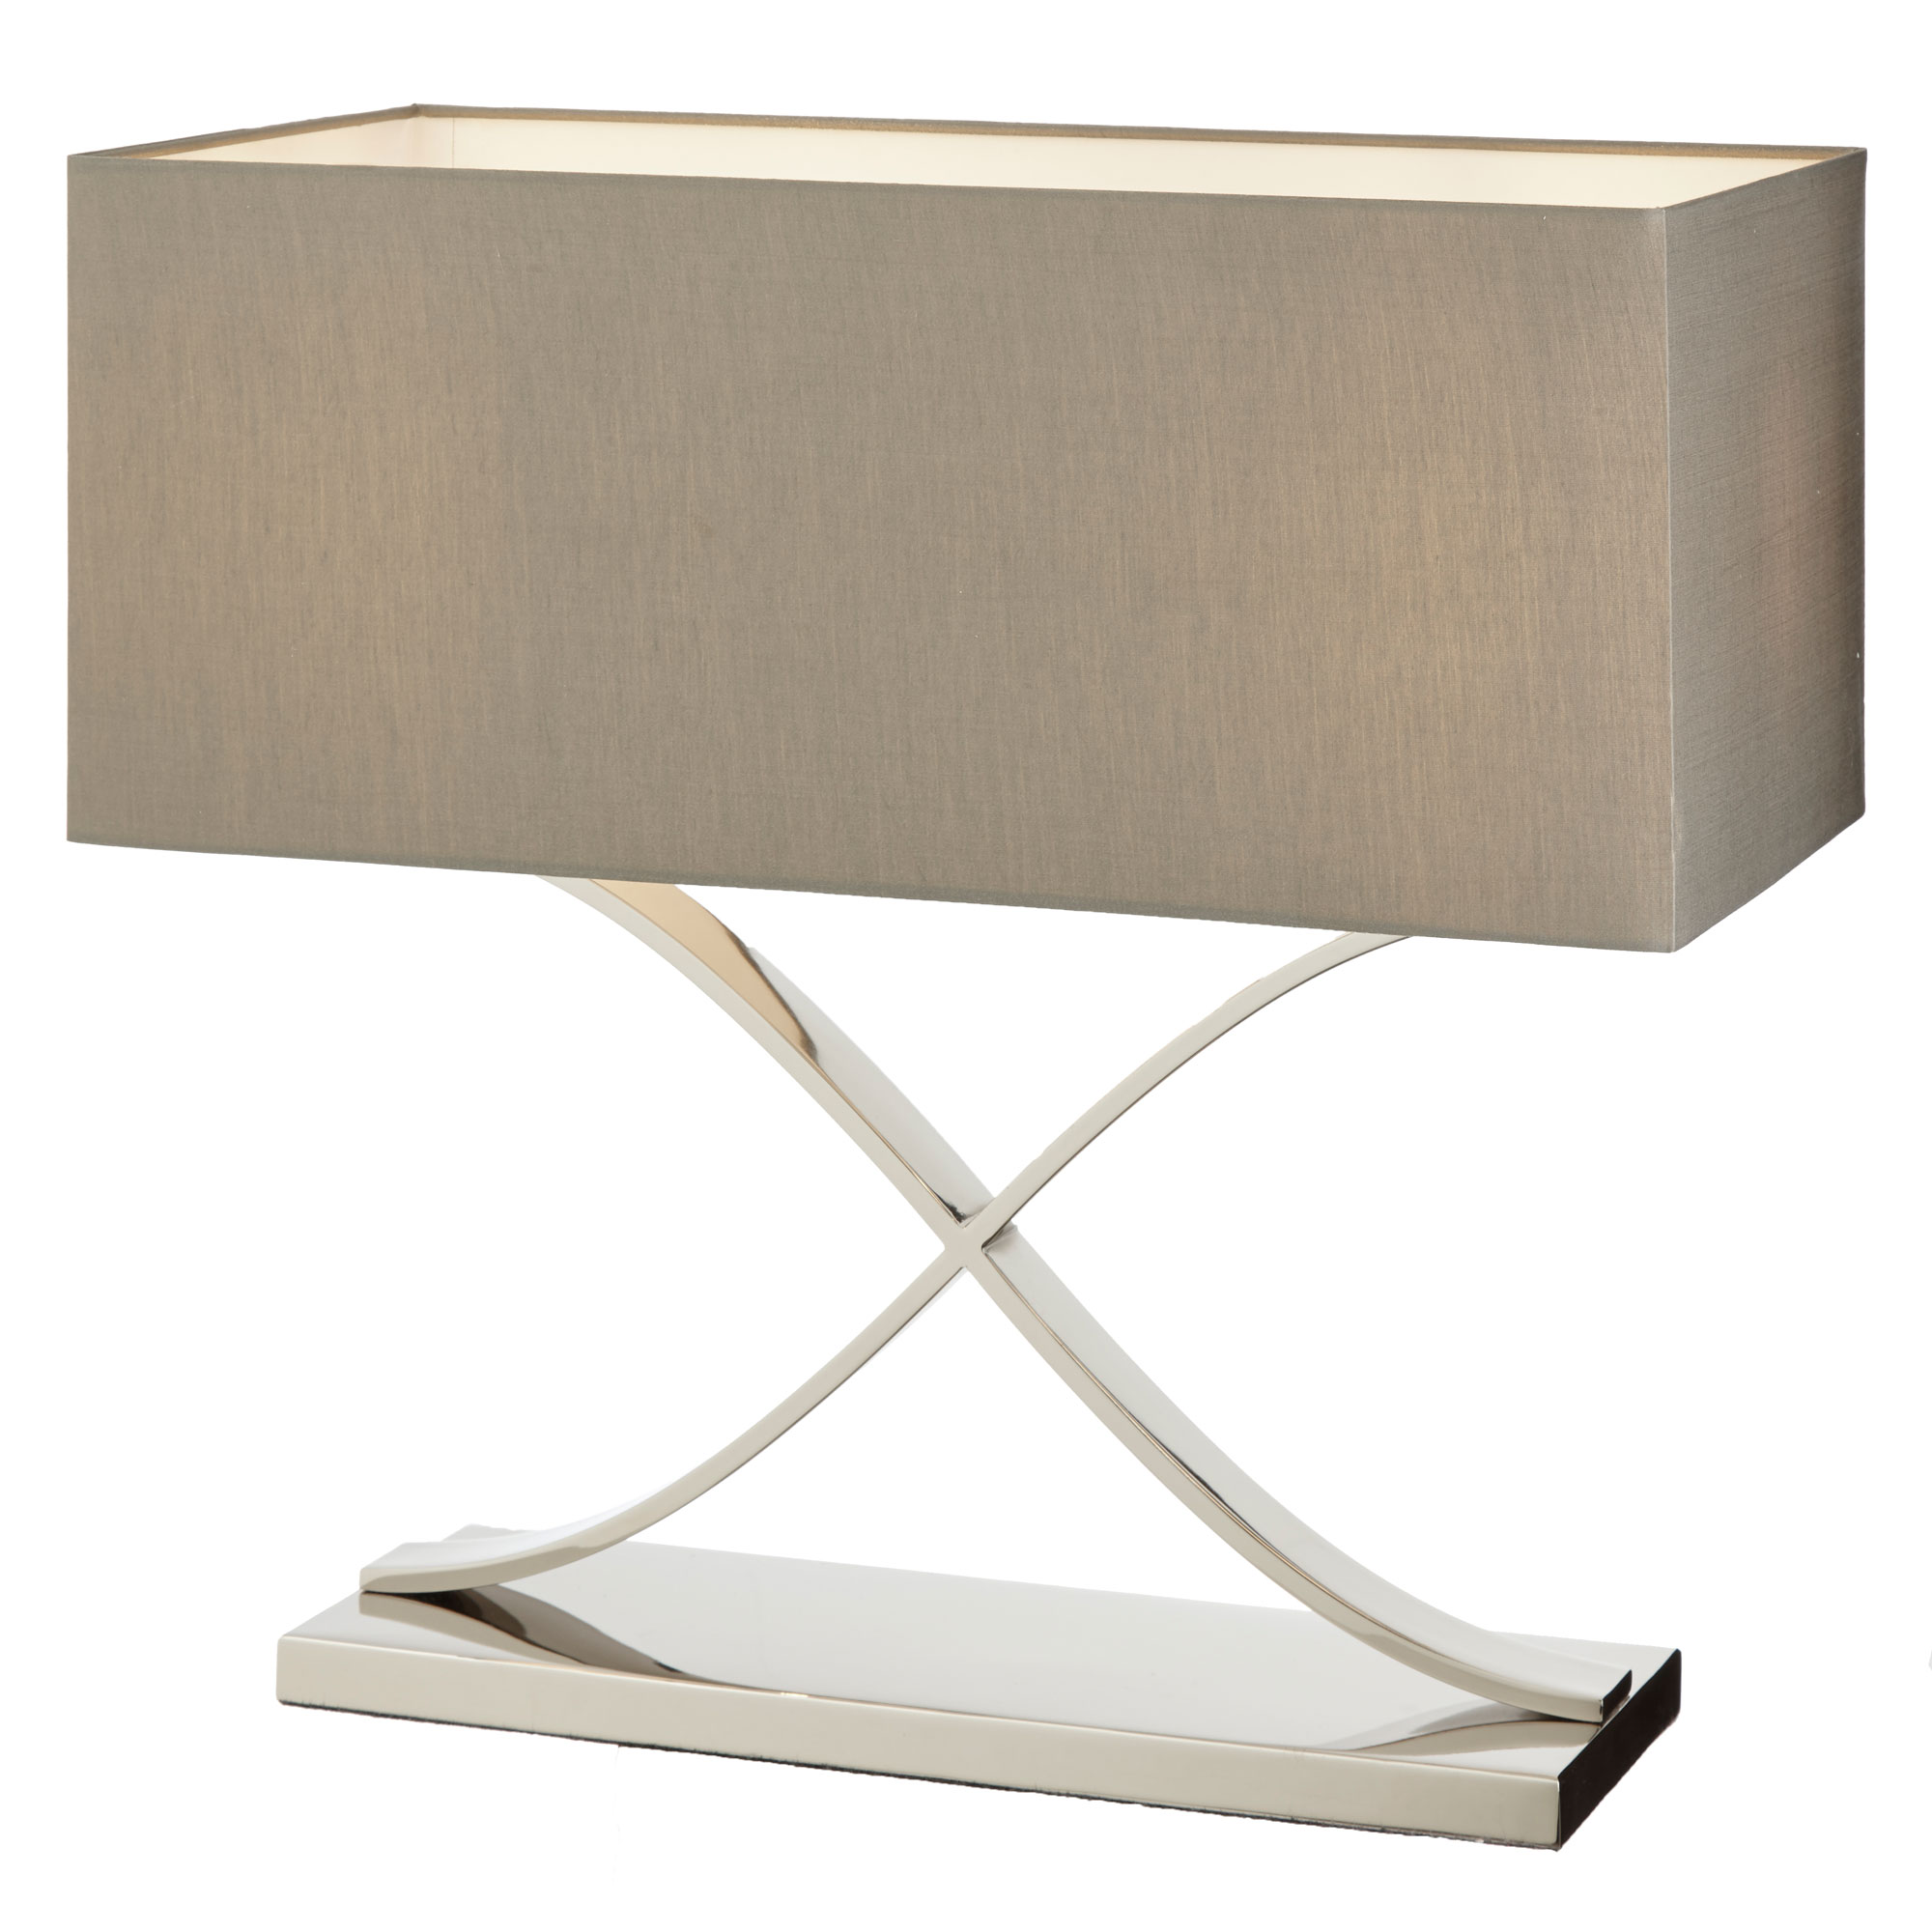 Byton Table Lamp with nickel finish RV Astley